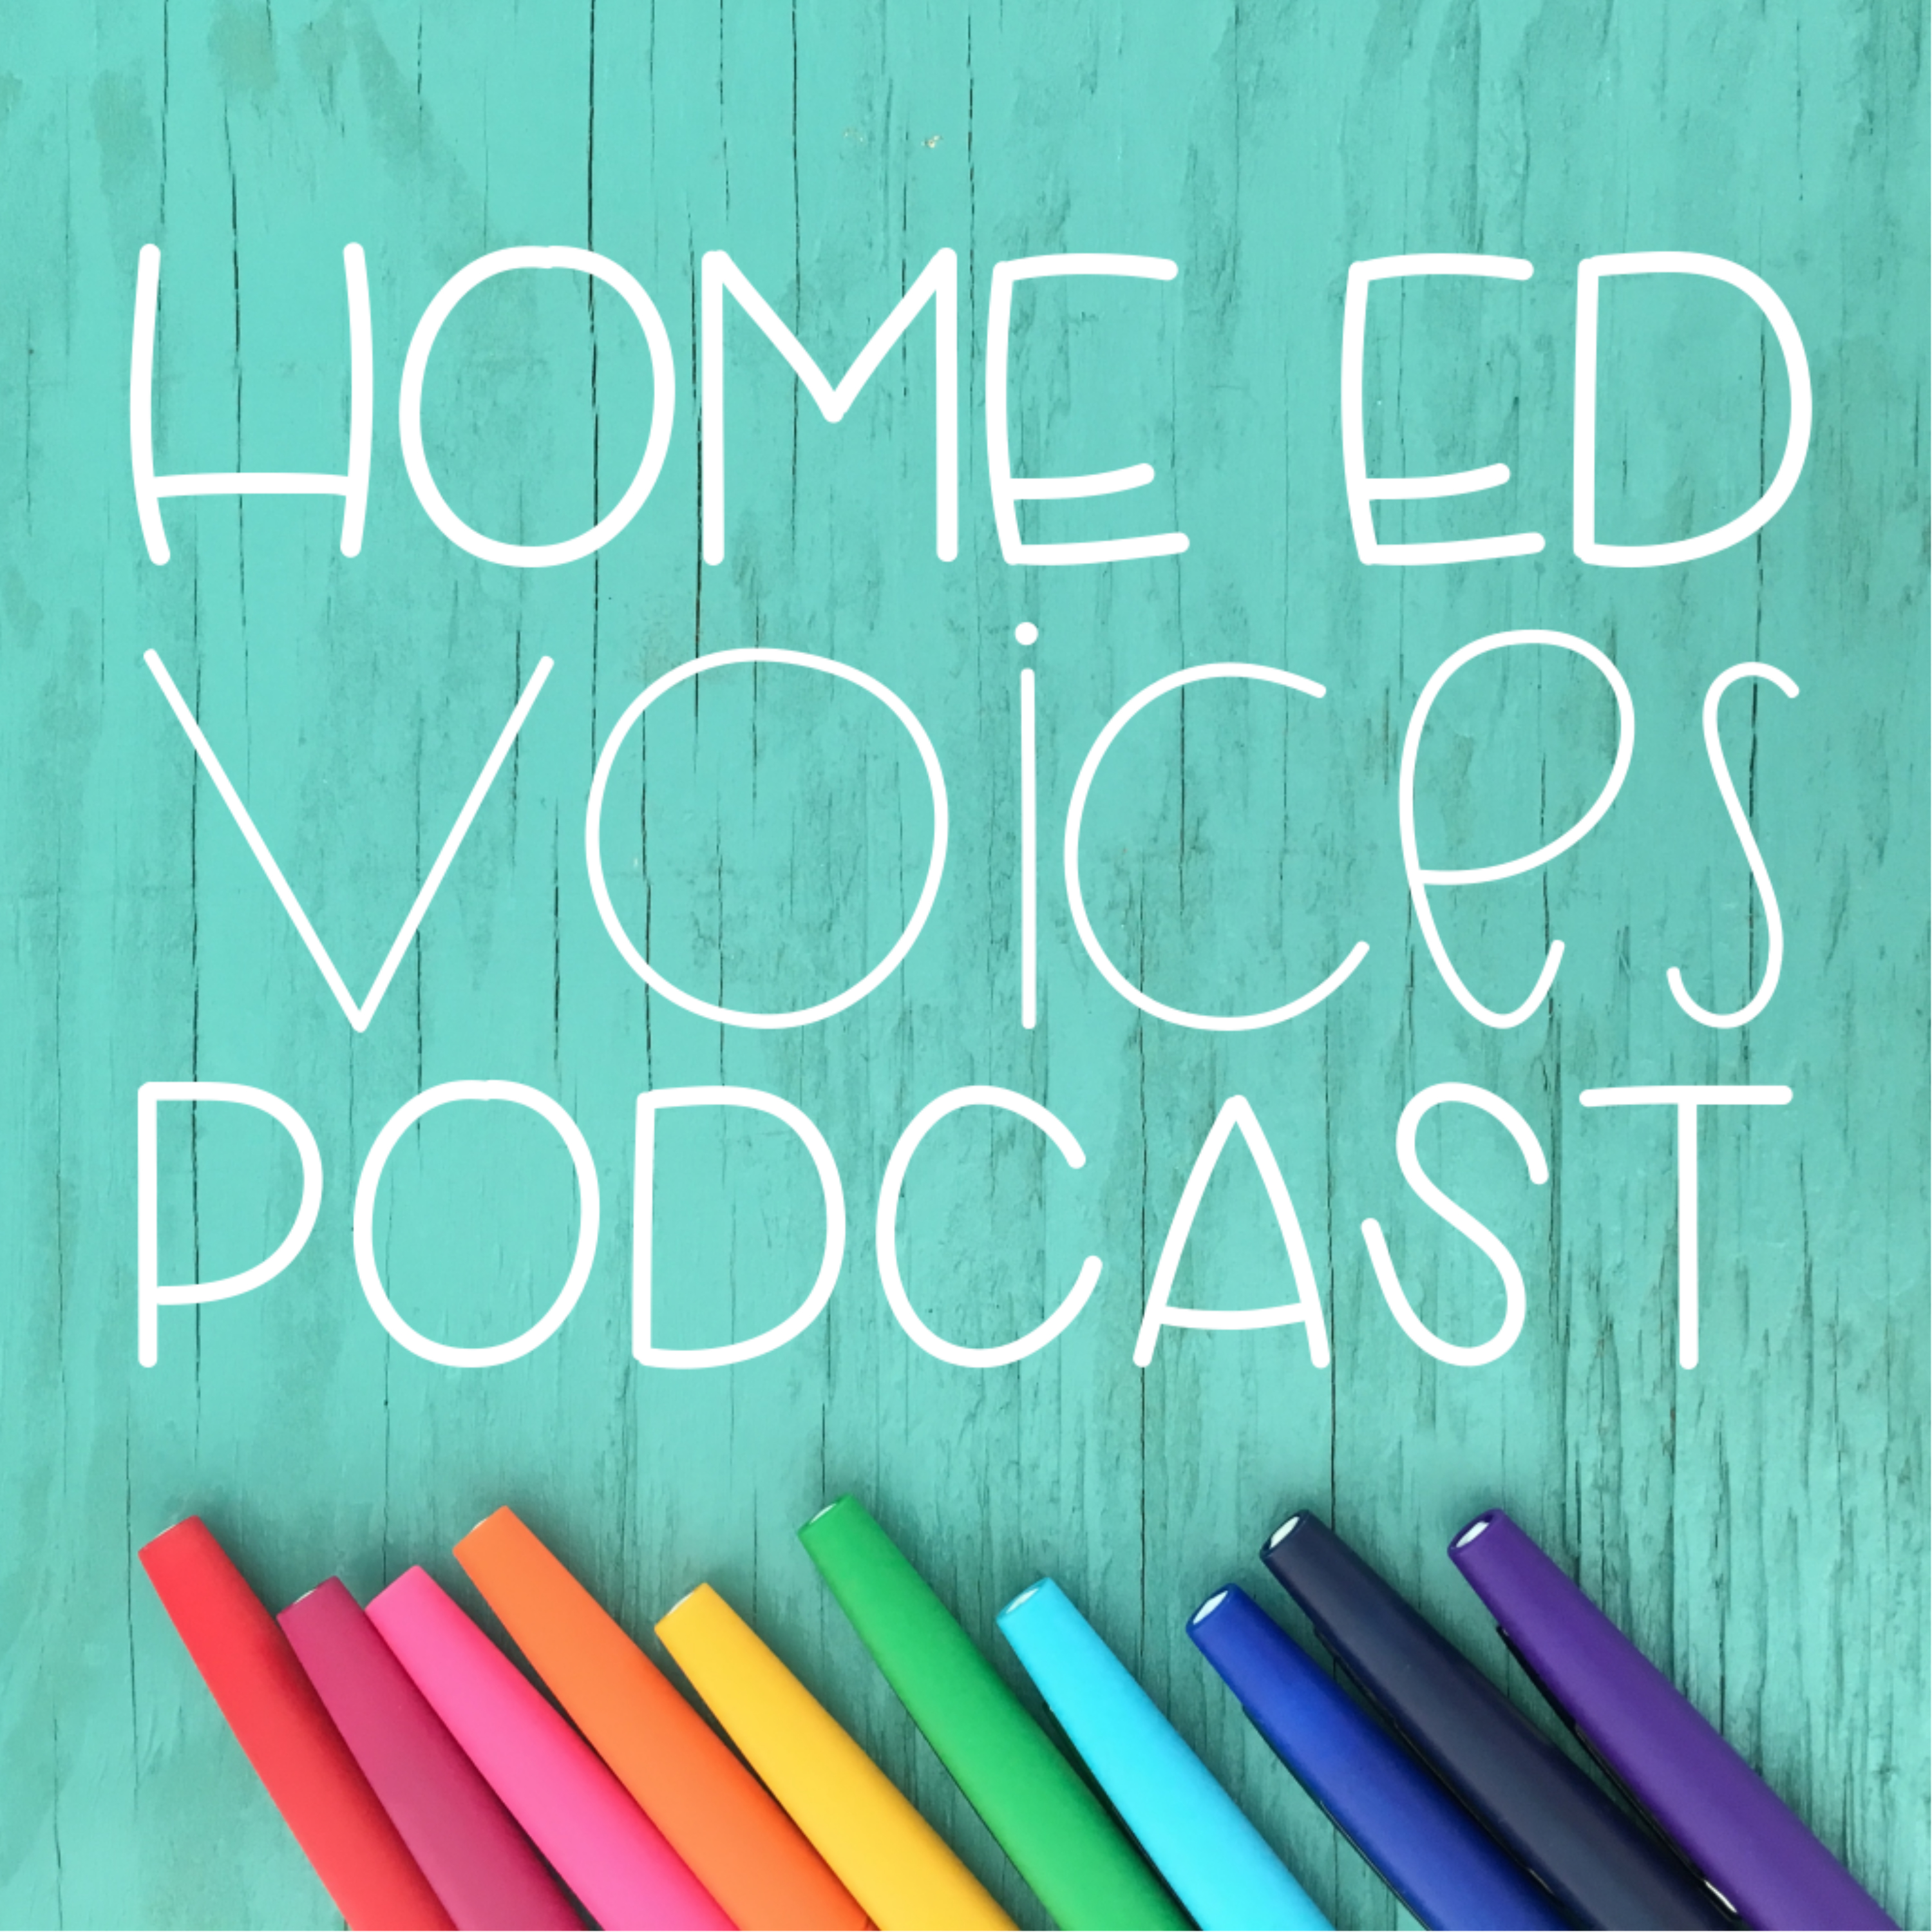 Home Ed Voices Podcast